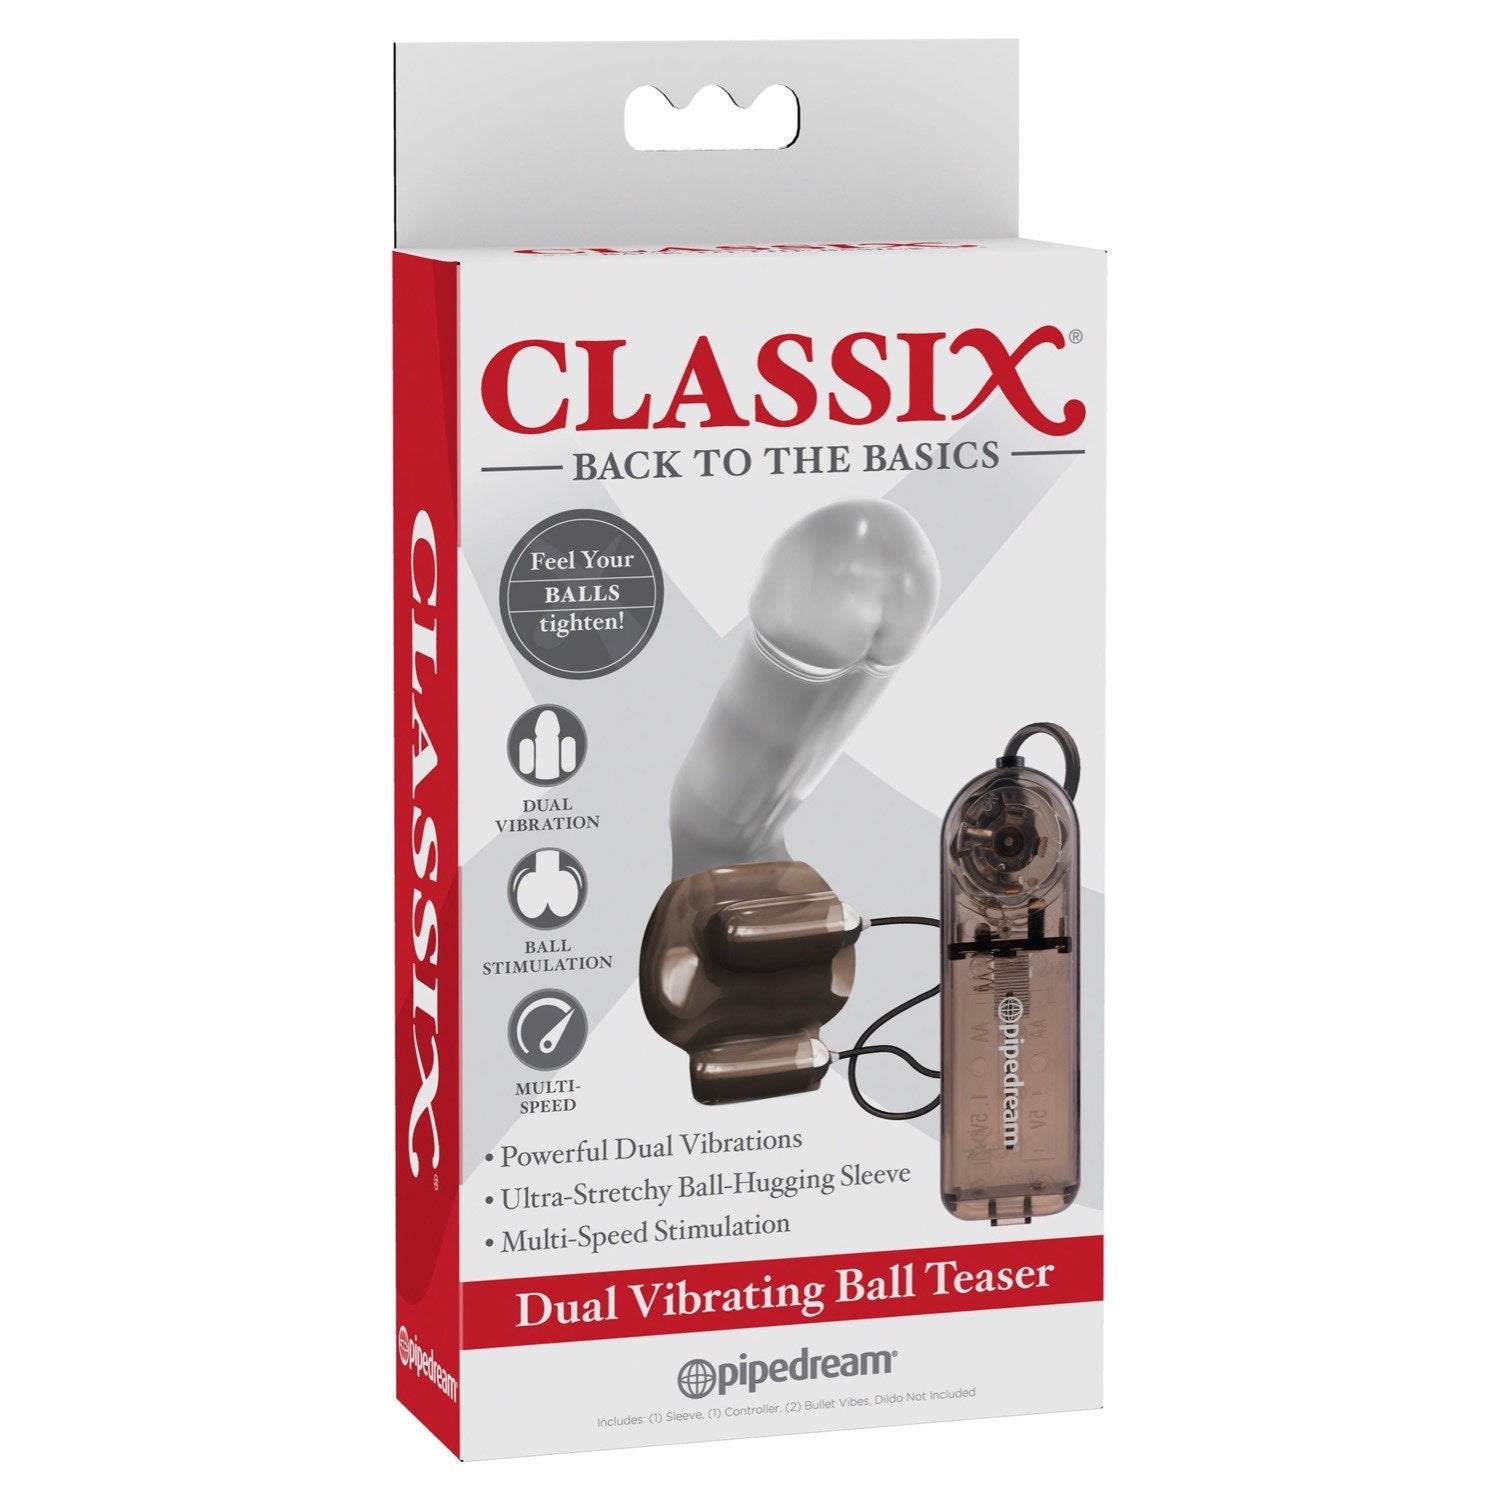 Classix Dual Vibrating Ball Teaser - Black by Pipedream